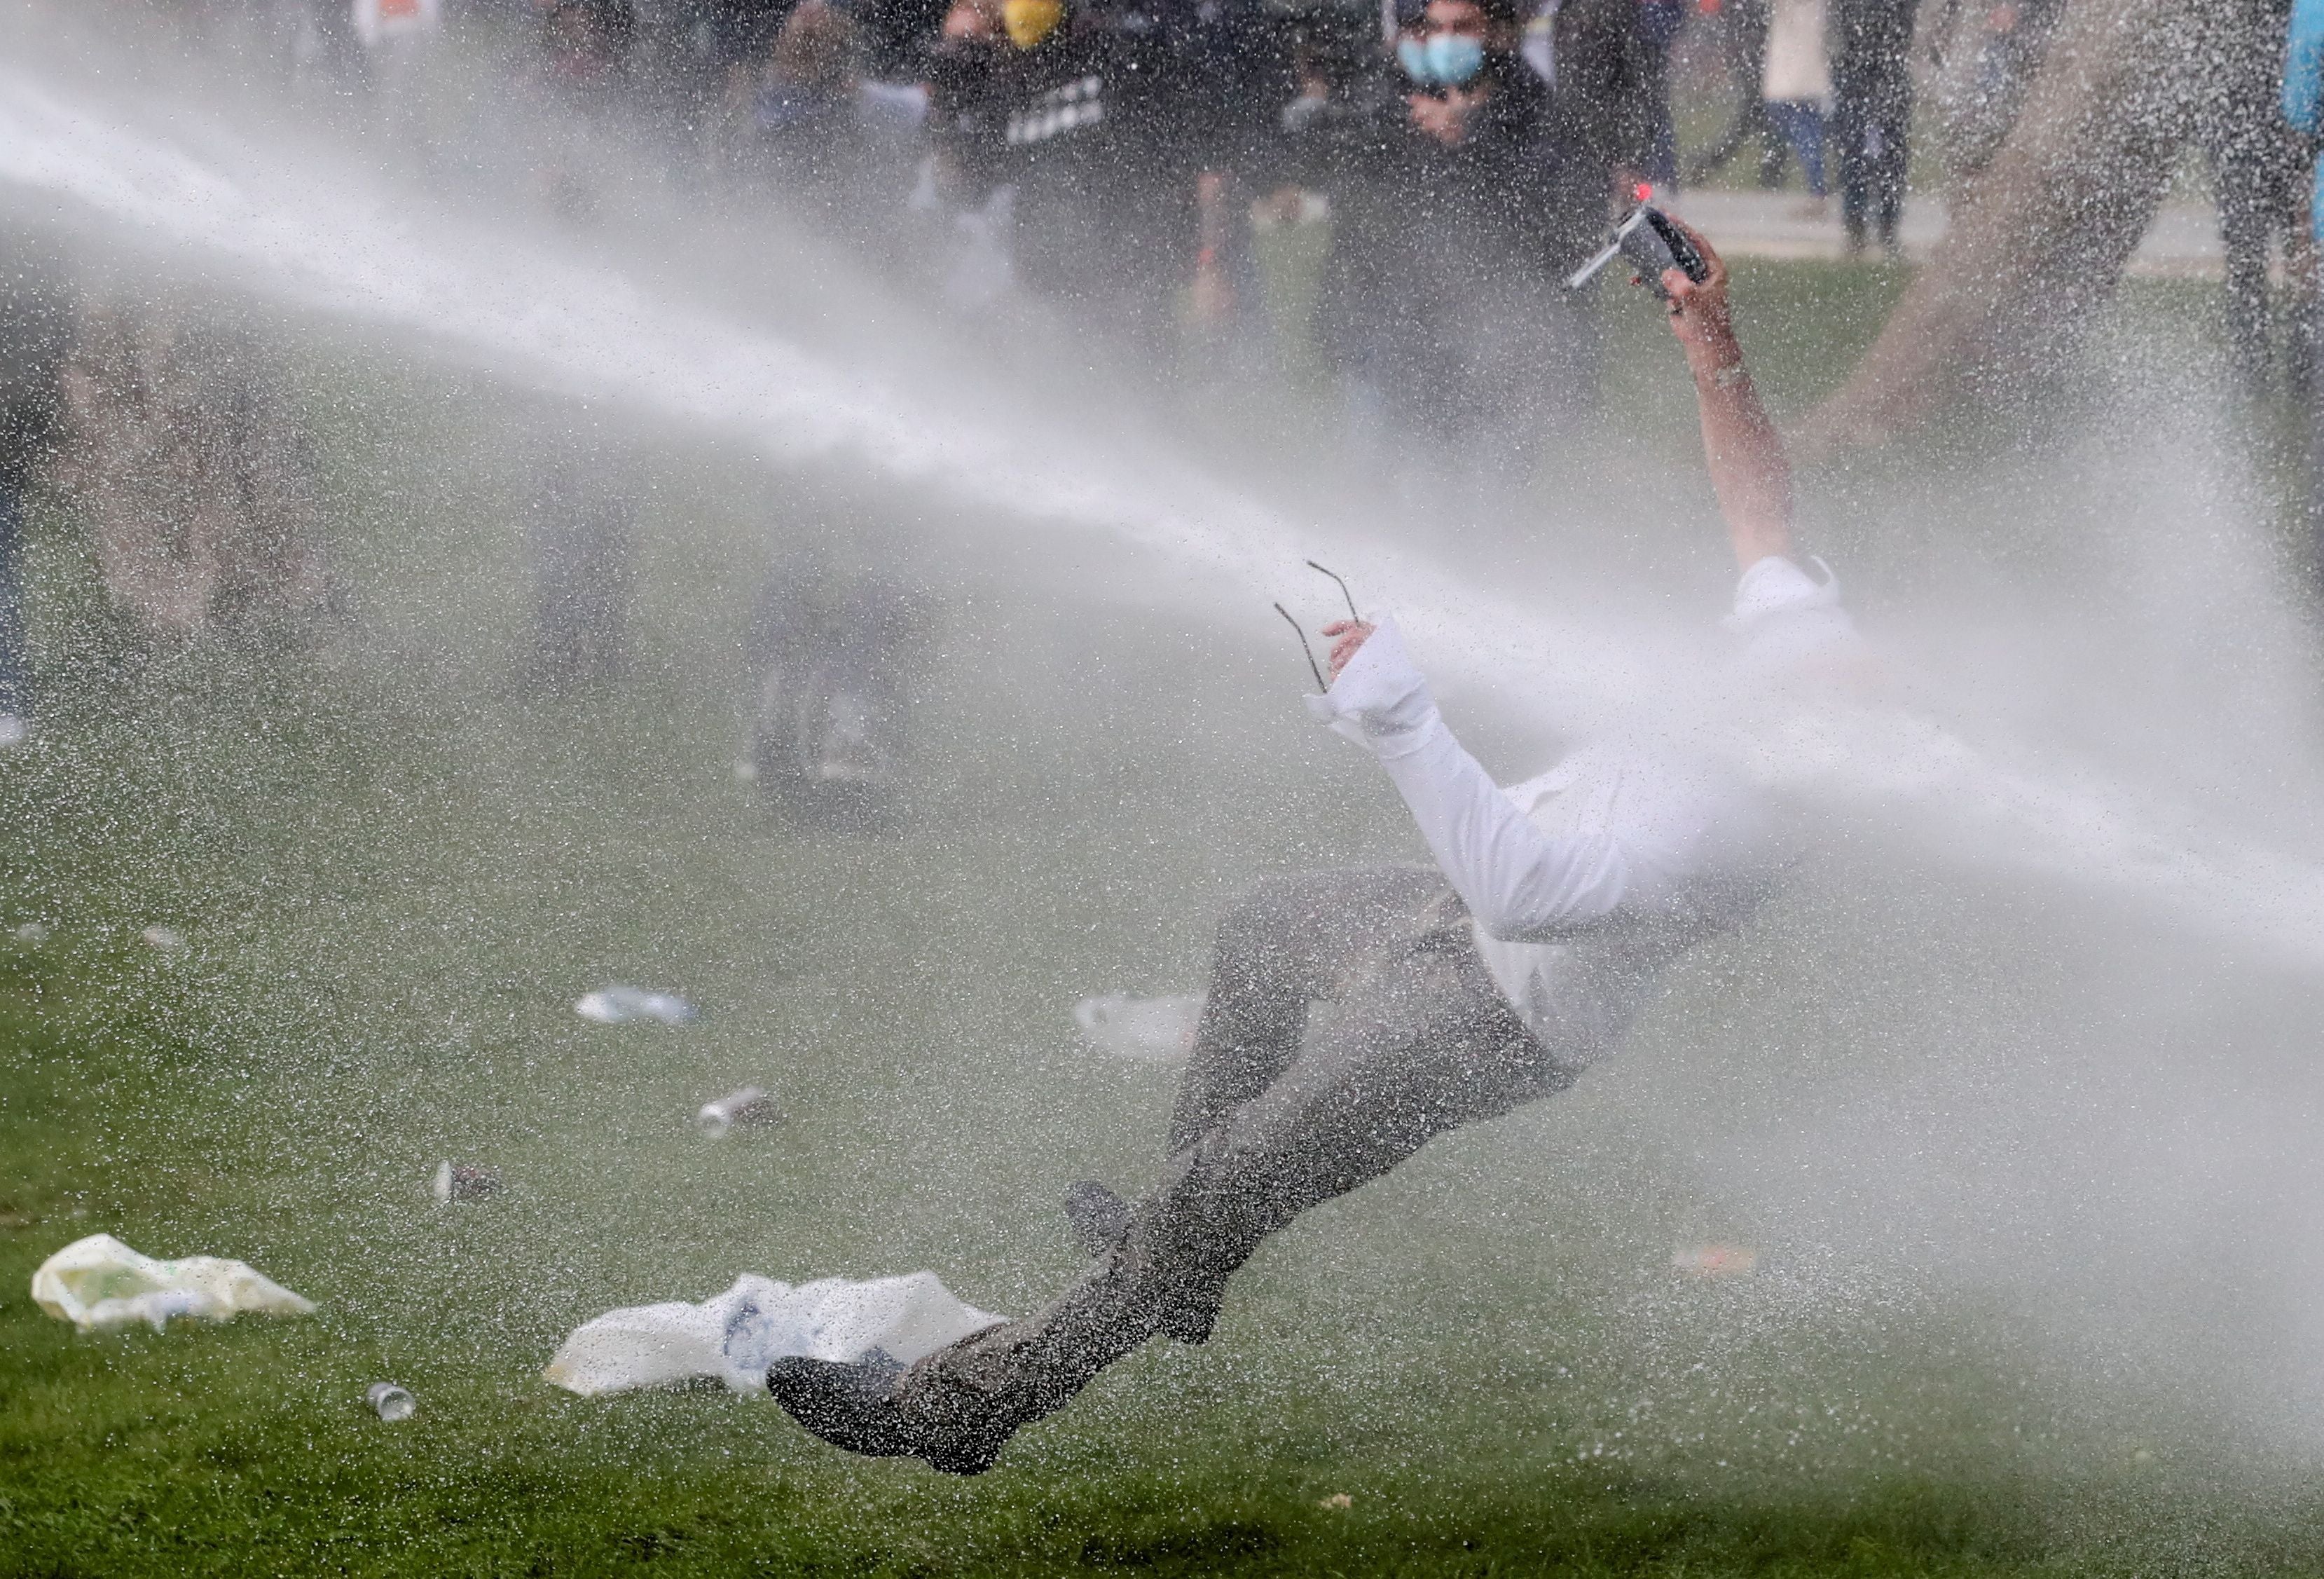 A man is knocked over by a water cannon during clashes as people gather in a park in defiance of Belgium’s Covid restrictions in Brussels